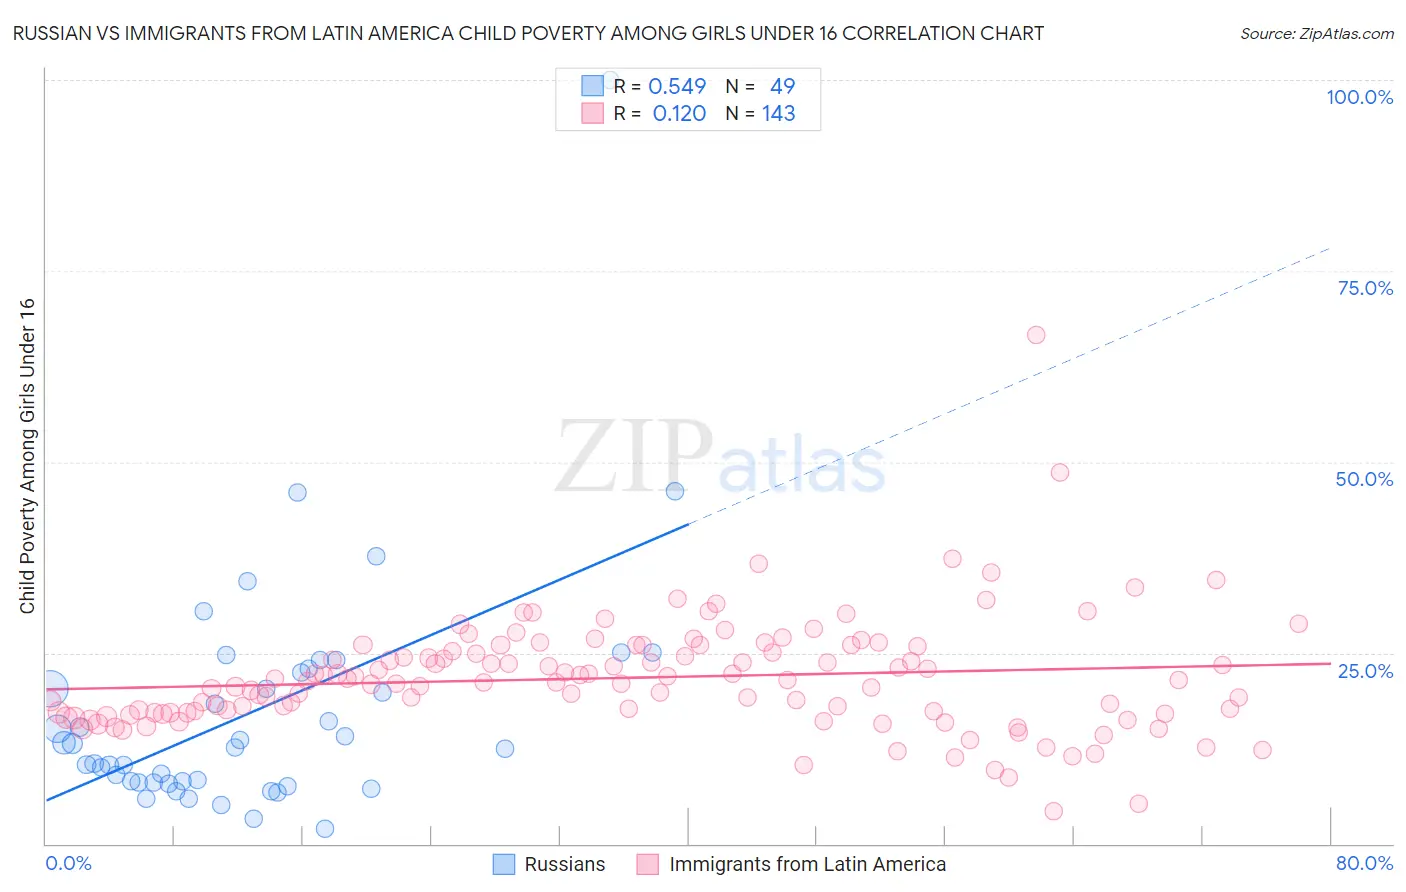 Russian vs Immigrants from Latin America Child Poverty Among Girls Under 16